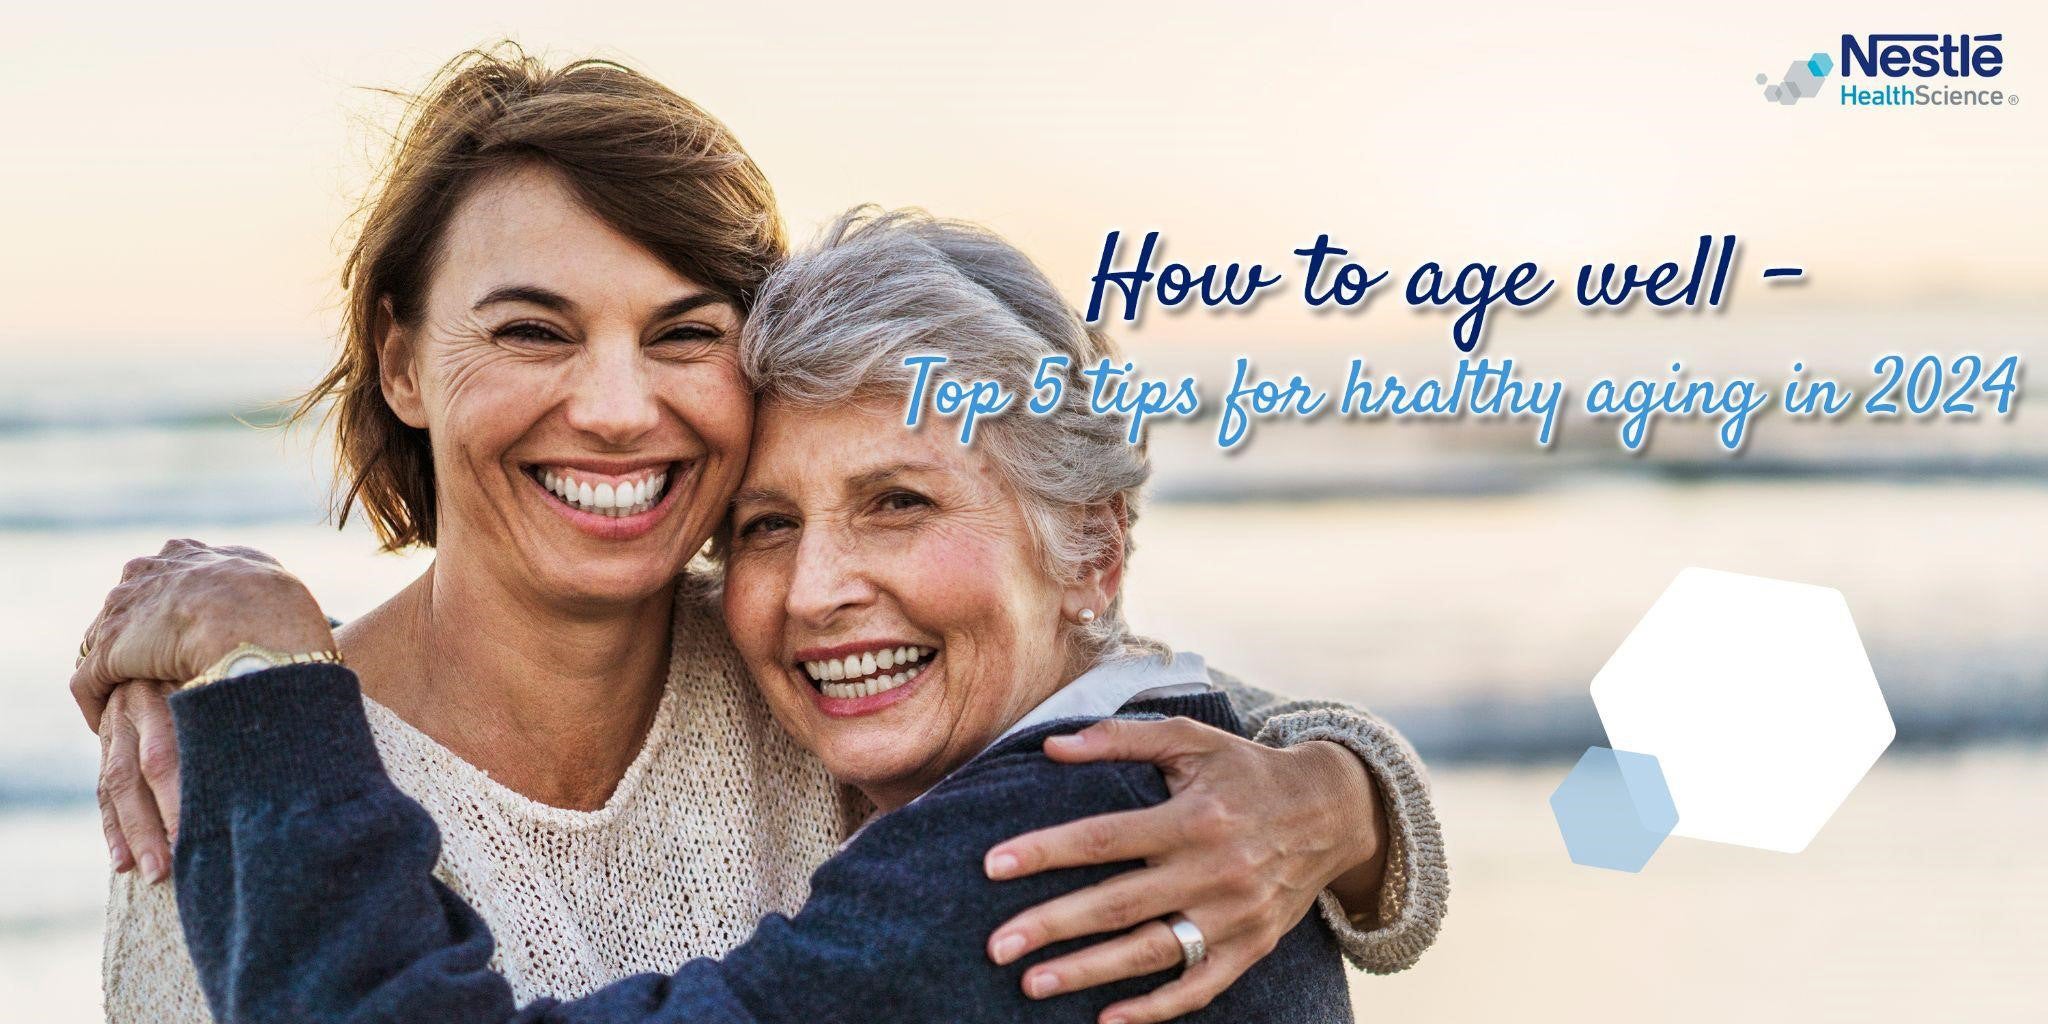 Top 5 tips for healthy aging in 2024